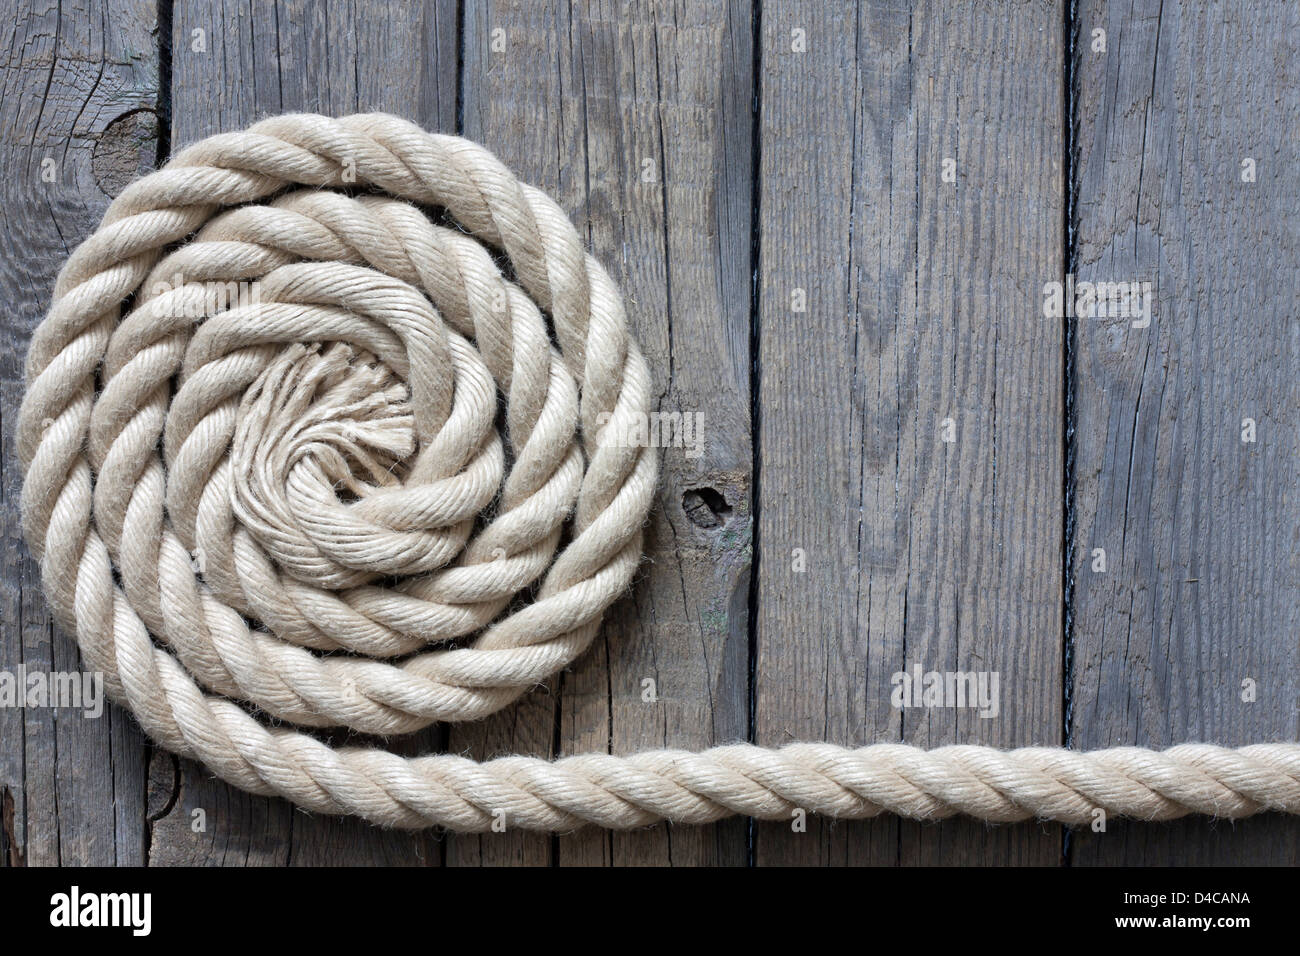 Old vintage rope and planks background abstract concept Stock Photo